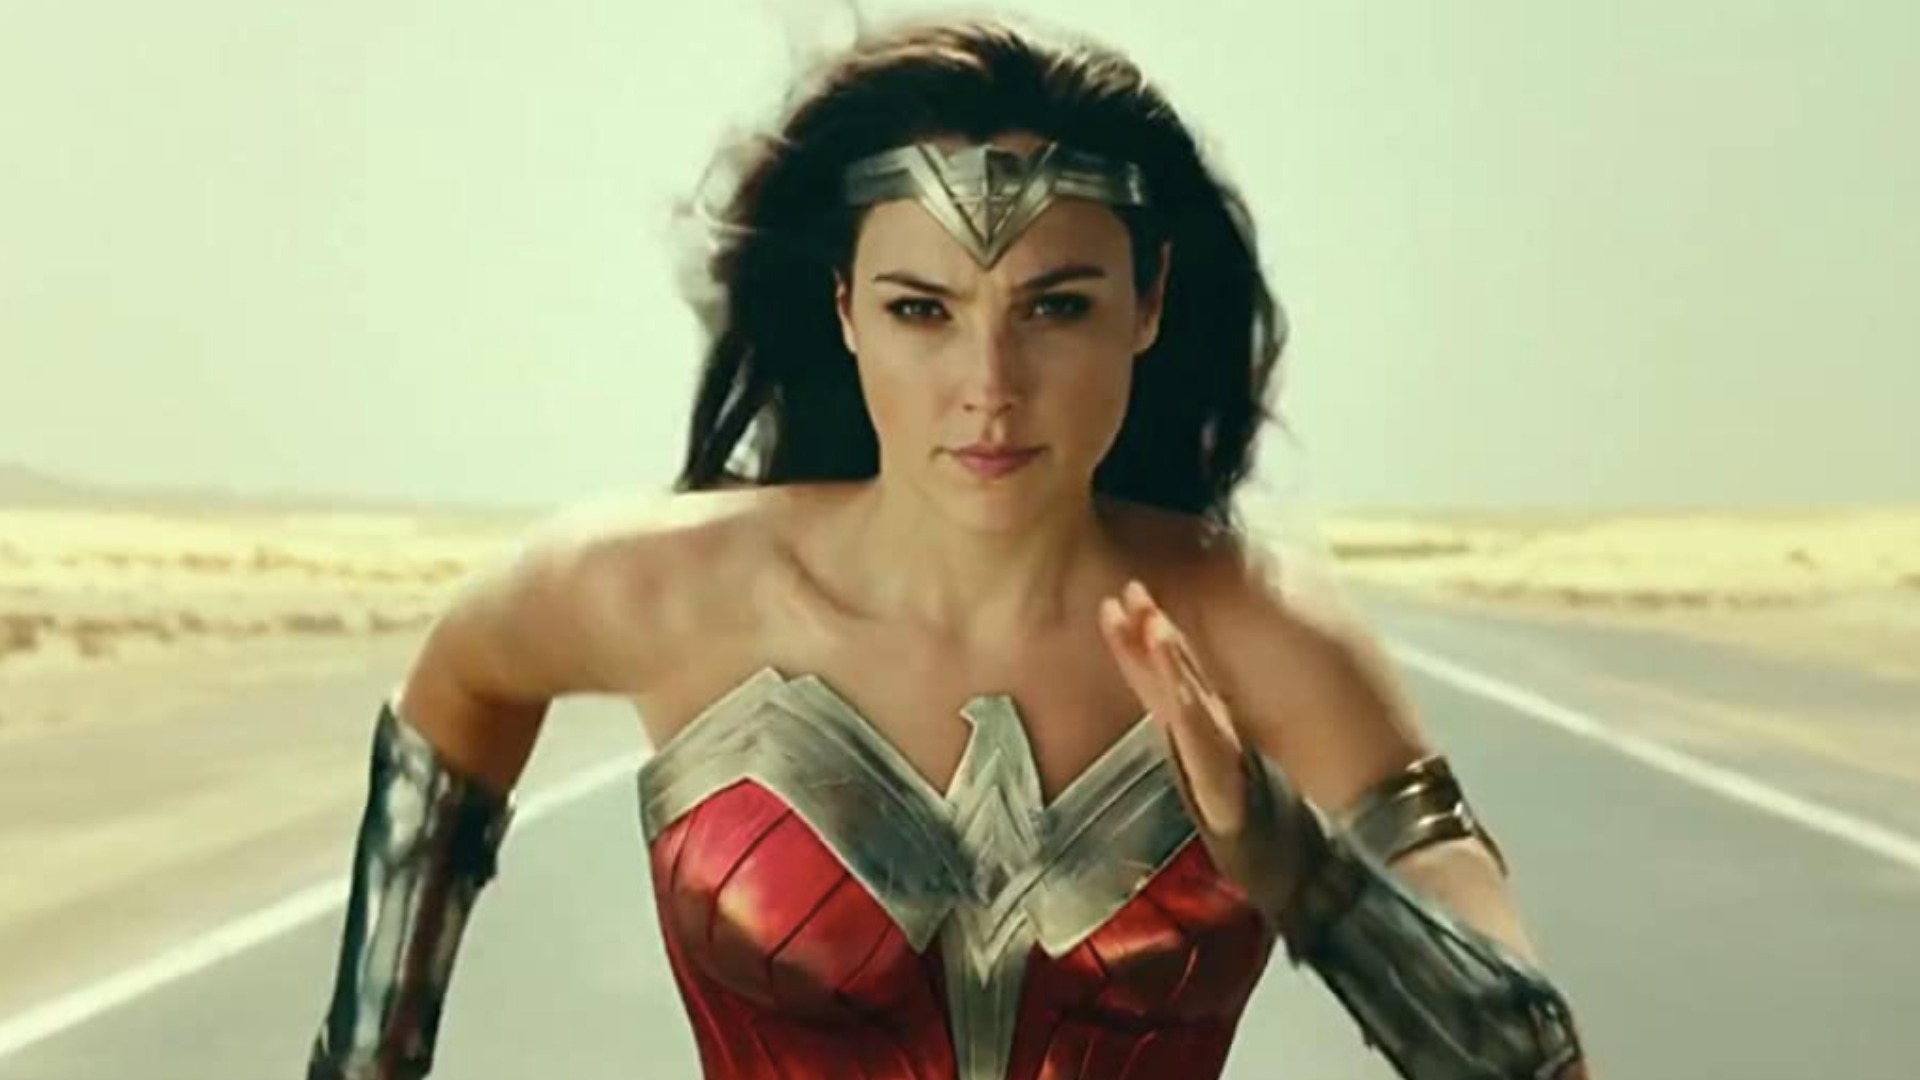 New Look At Gal Gadot's Wonder Woman from Shazam! Fury of The Gods